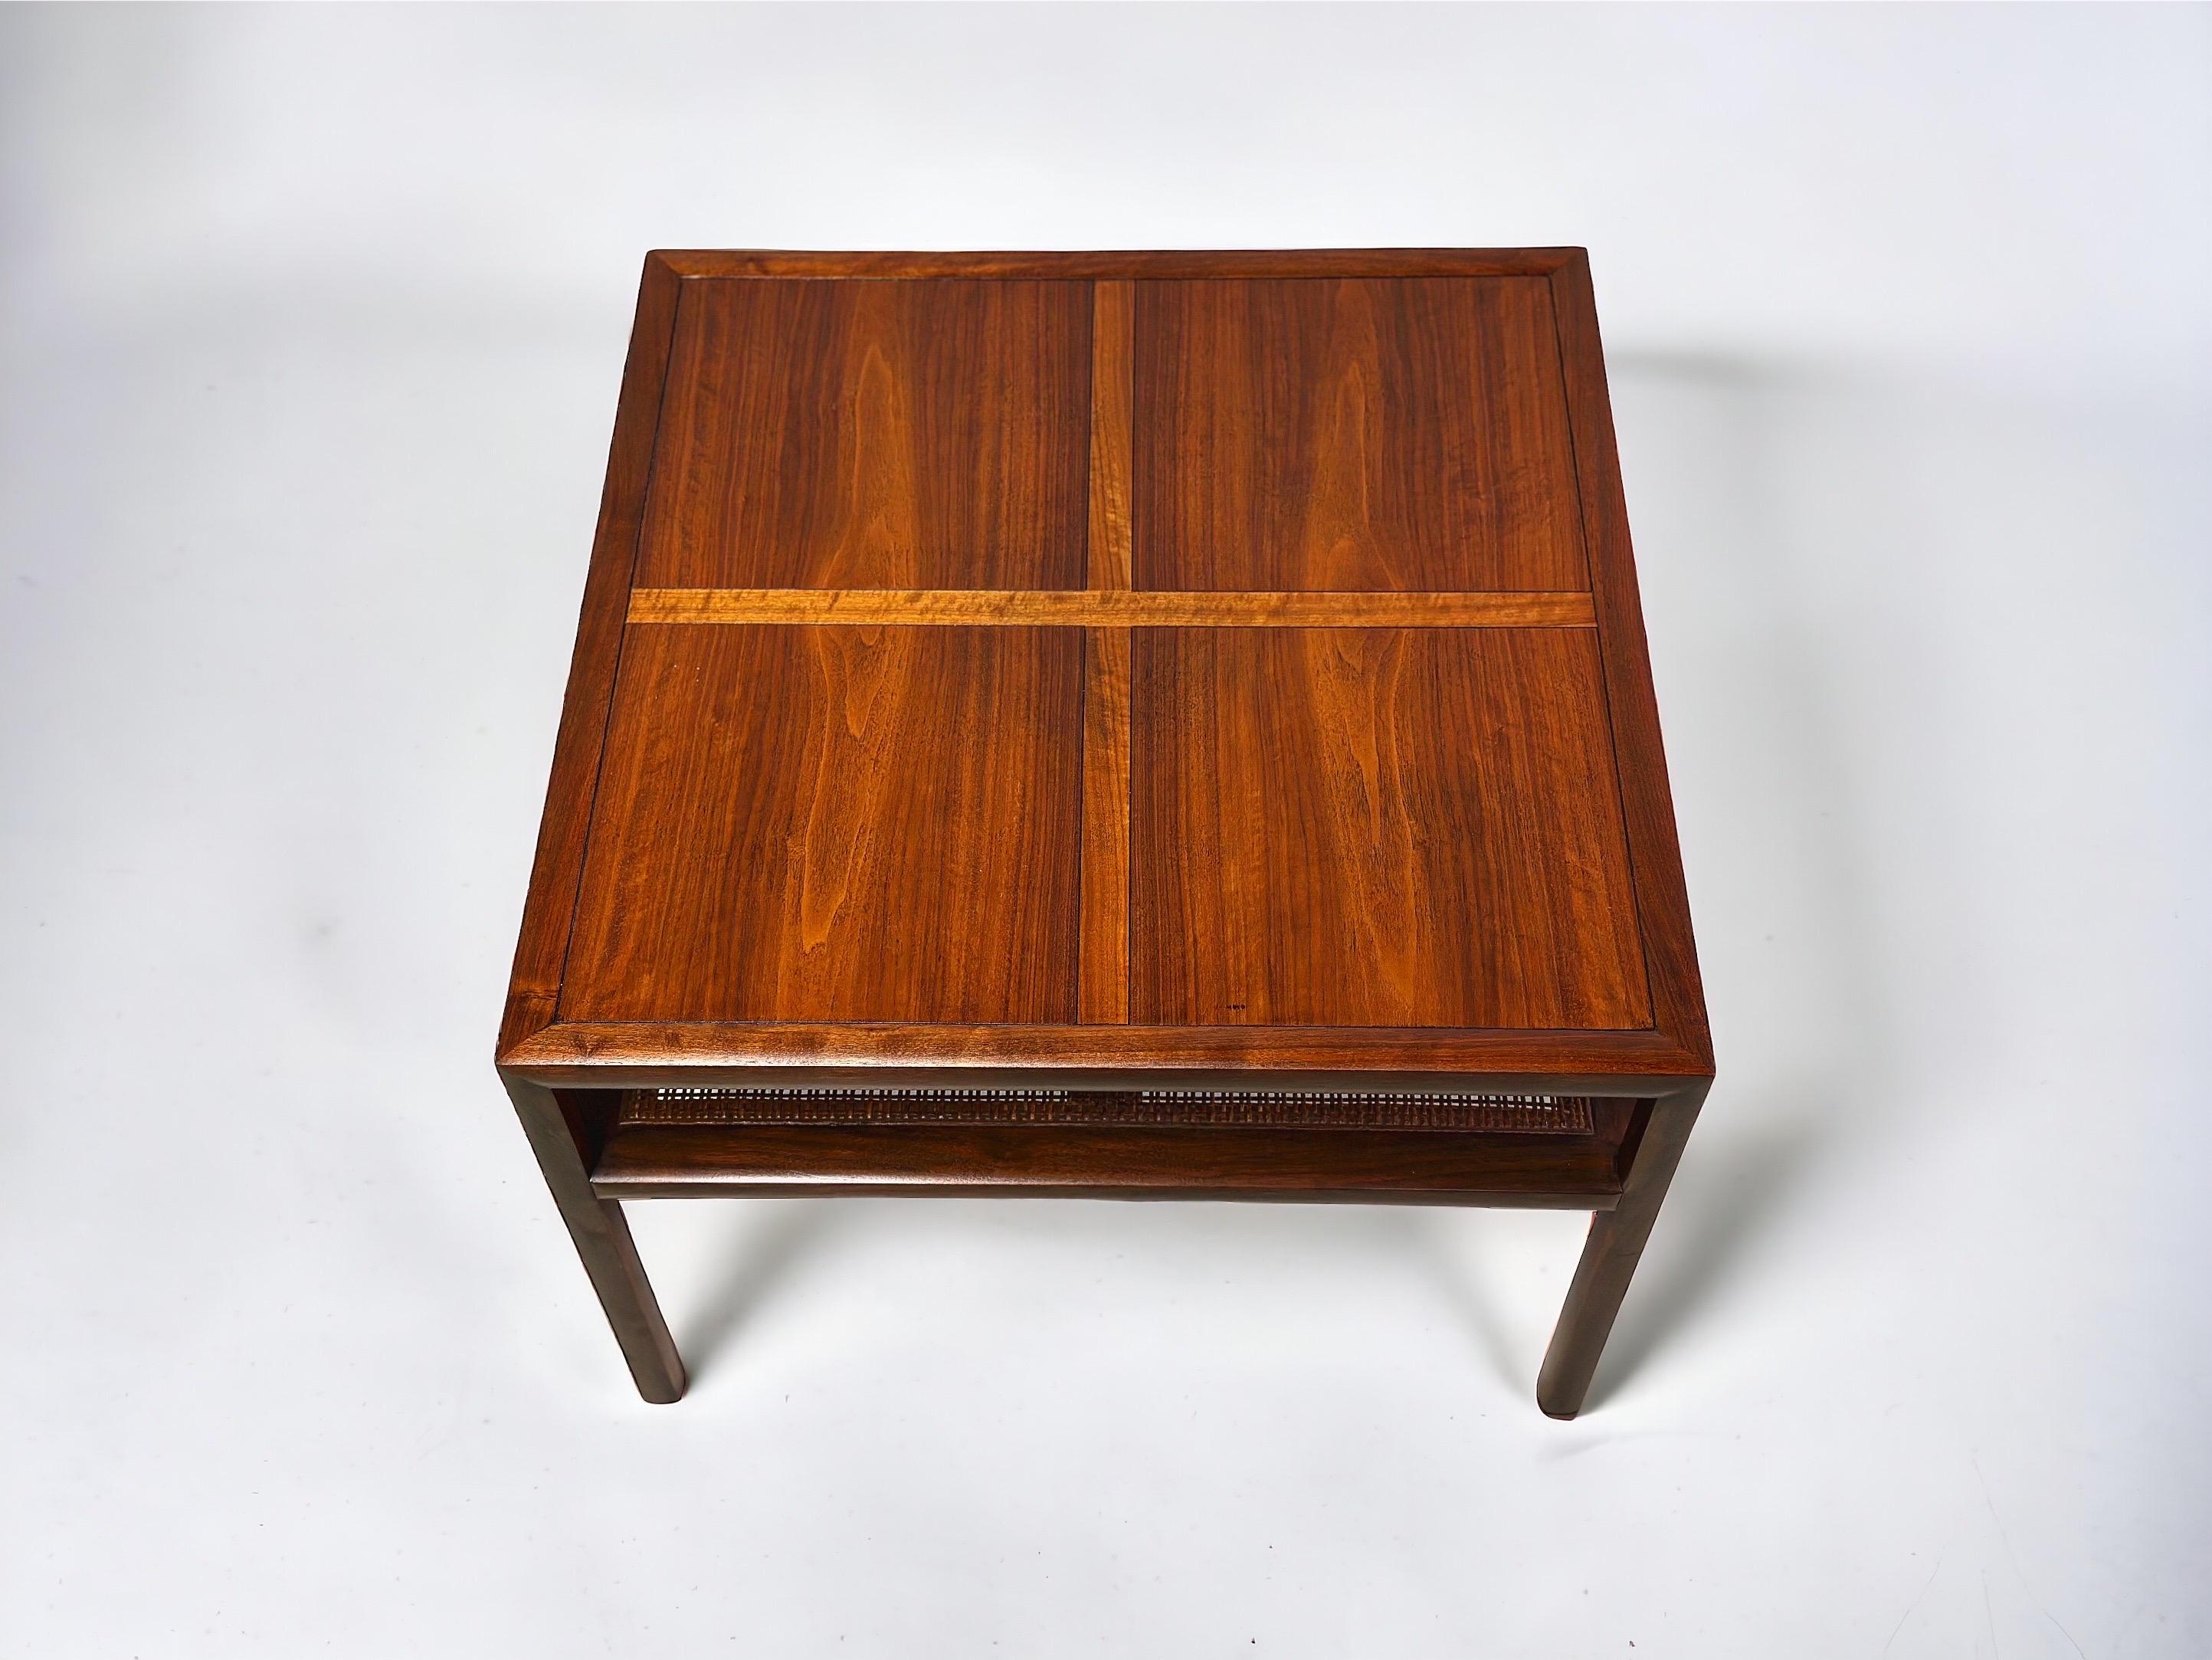 Vintage square cocktail table by Michael Taylor for Baker Furniture, circa 1950s. Part of his 